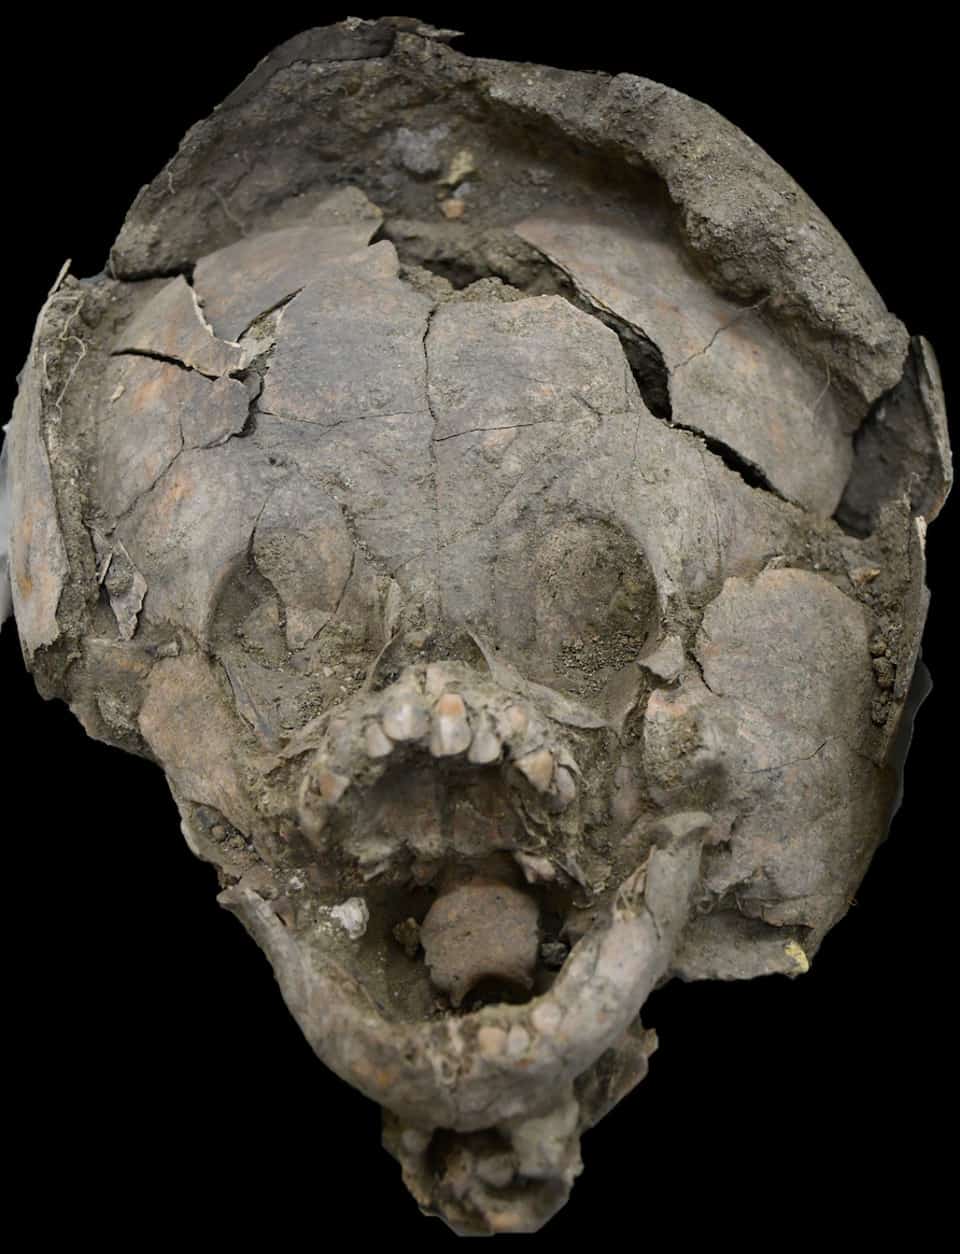 x - Infants found buried in Ecuador were wearing ‘helmets’ made from other children’s skulls